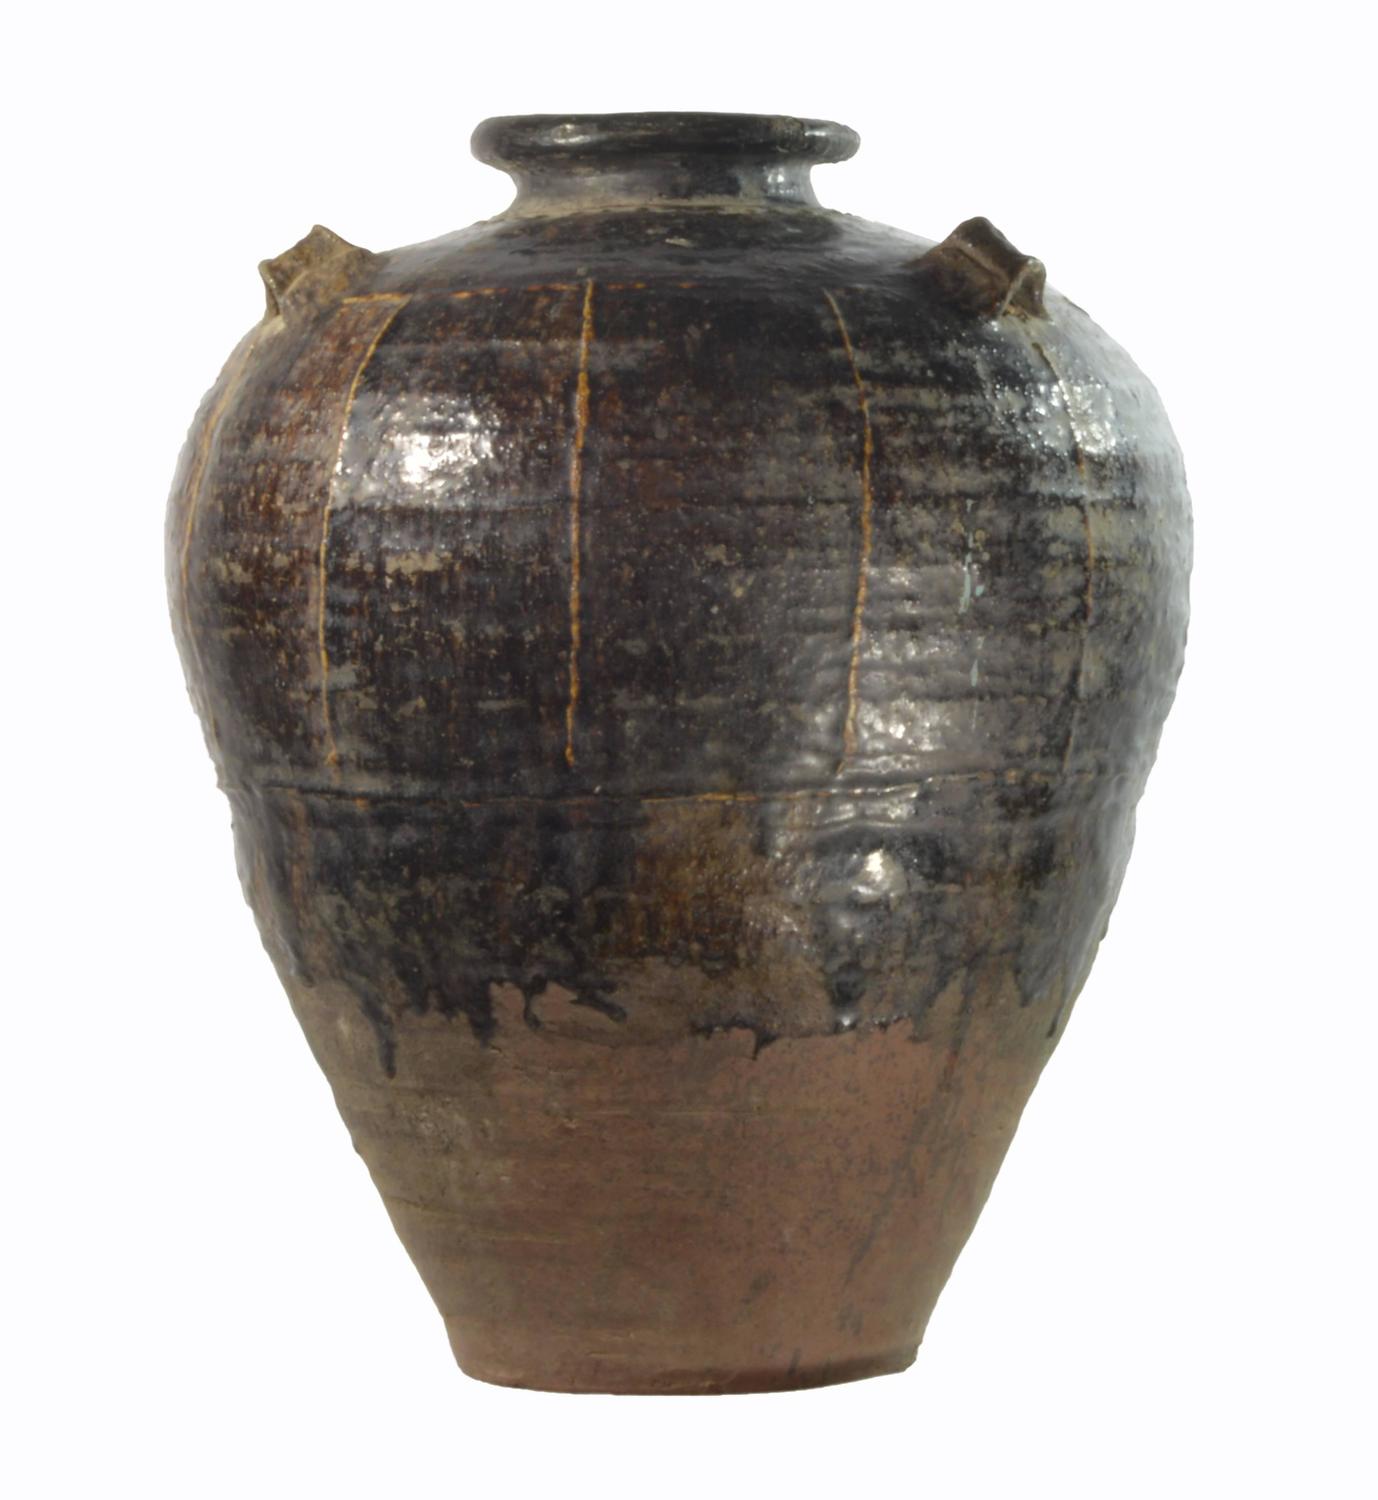 Large 18th Century Ceramic Vessel For Sale at 1stdibs1378 x 1500